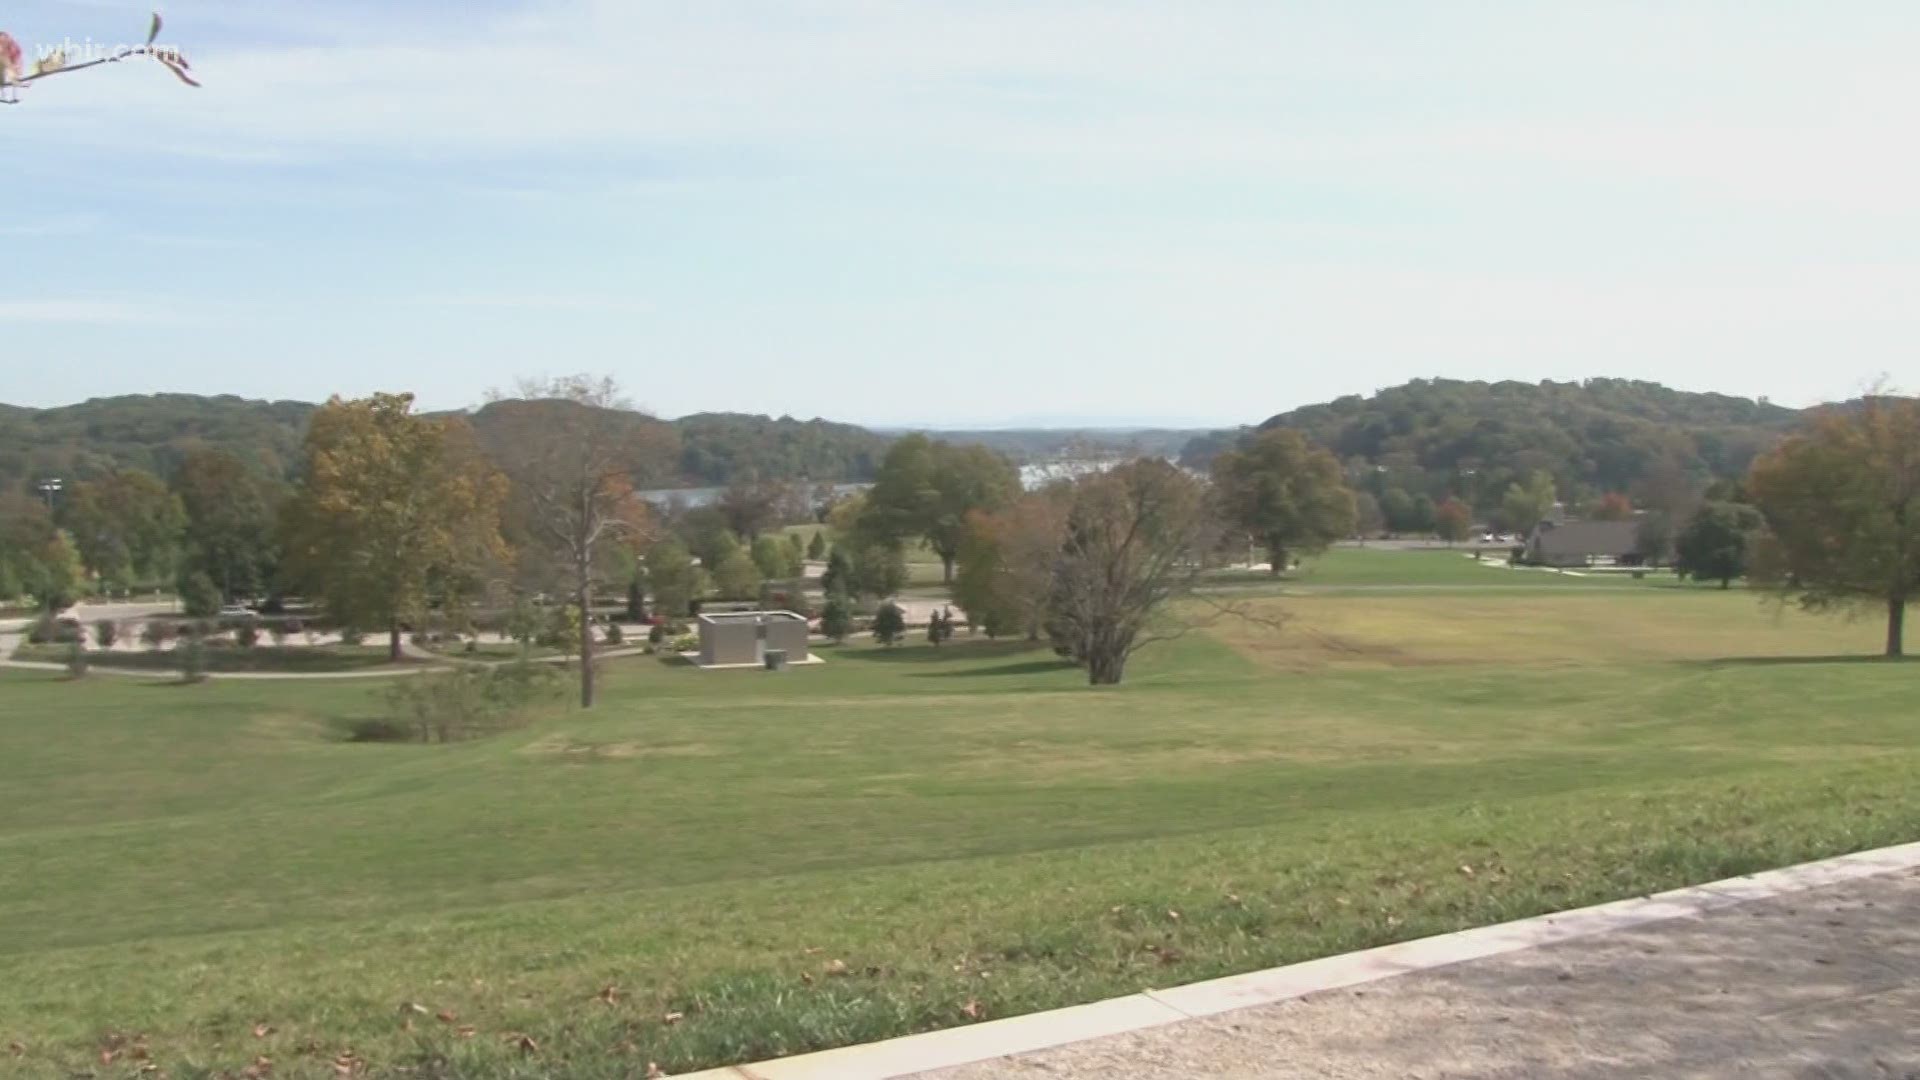 THE LAKESHORE PARK CONSERVANCY SAYS ONE OF ITS GOALS IS TO CREATE OUTDOOR SPACES WHERE PEOPLE CAN GATHER TOGETHER.